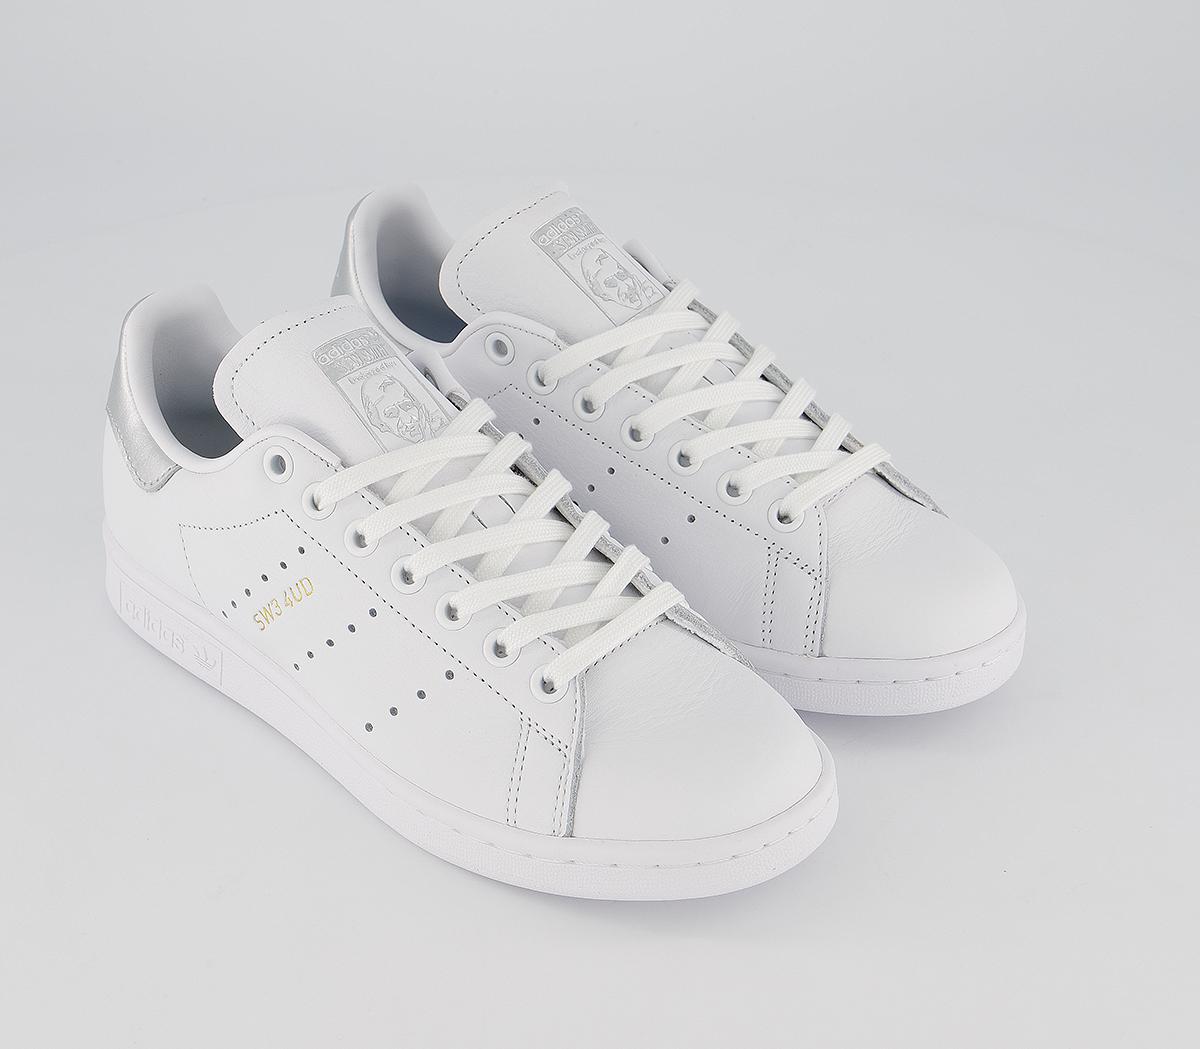 adidas Stan Smith Trainers White Silver Metallic Sw3 4ud Exclusive ...